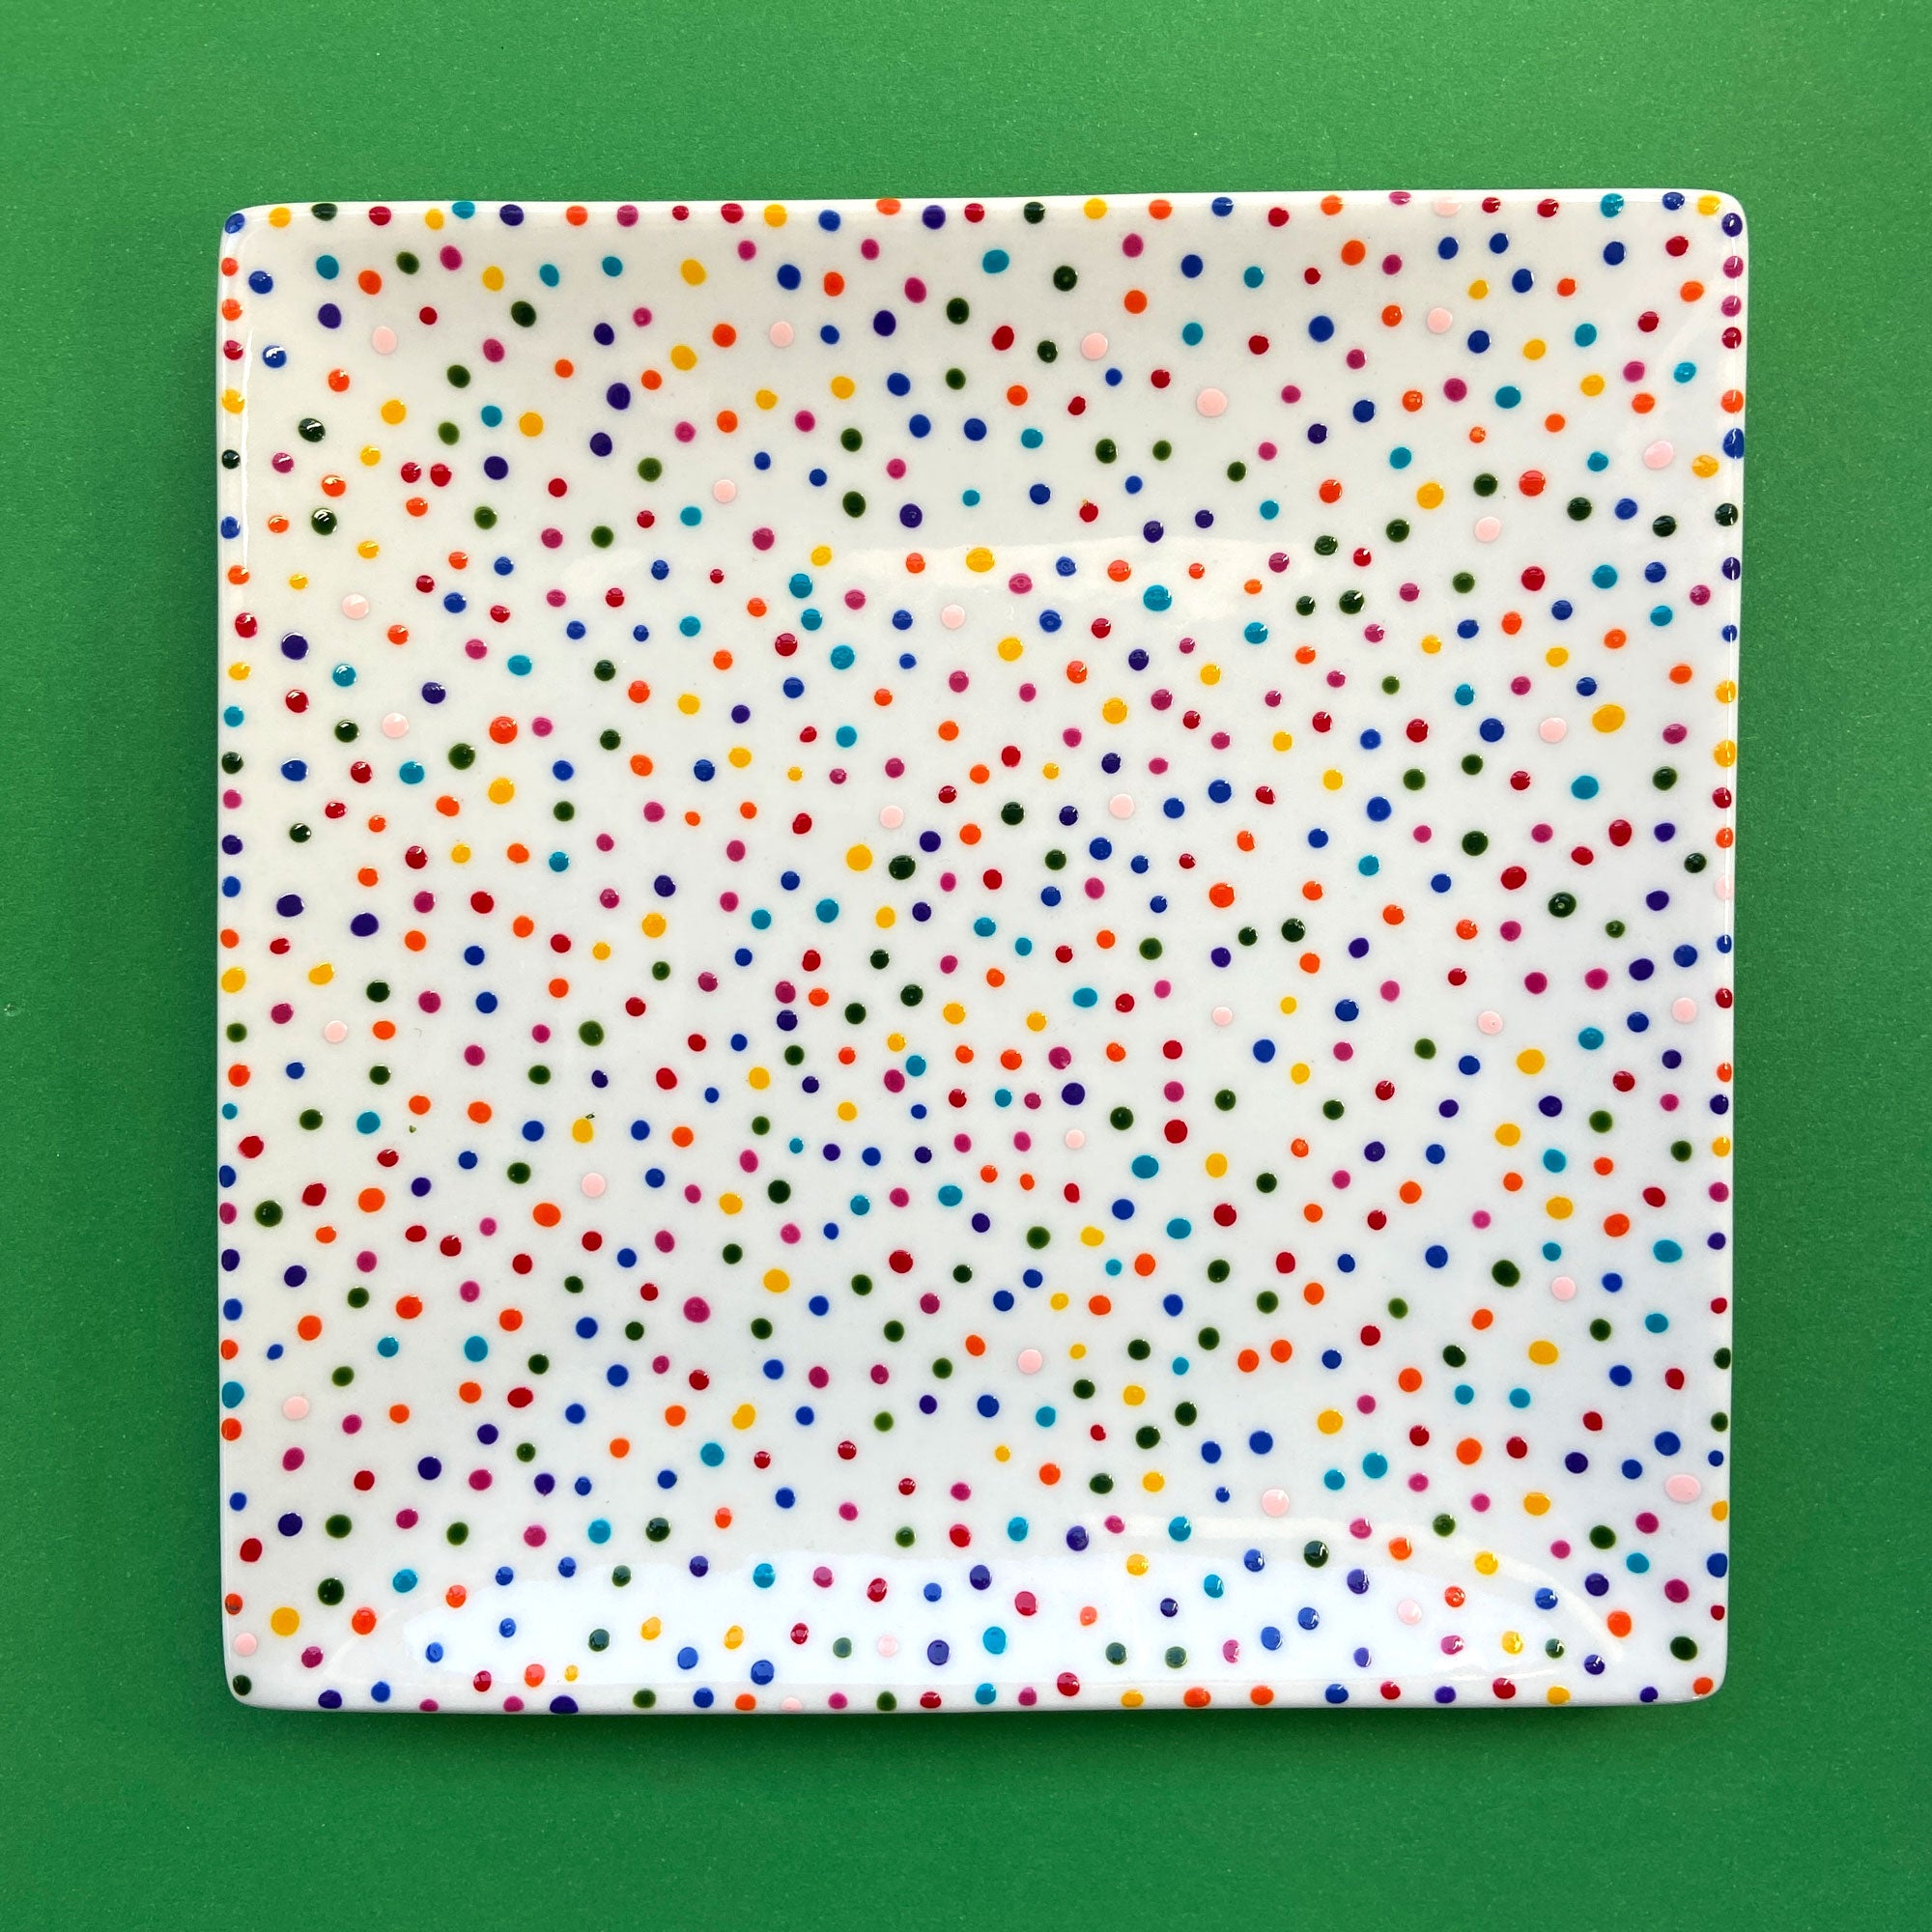 Rainbow Dot - Hand Painted Porcelain Square Plate